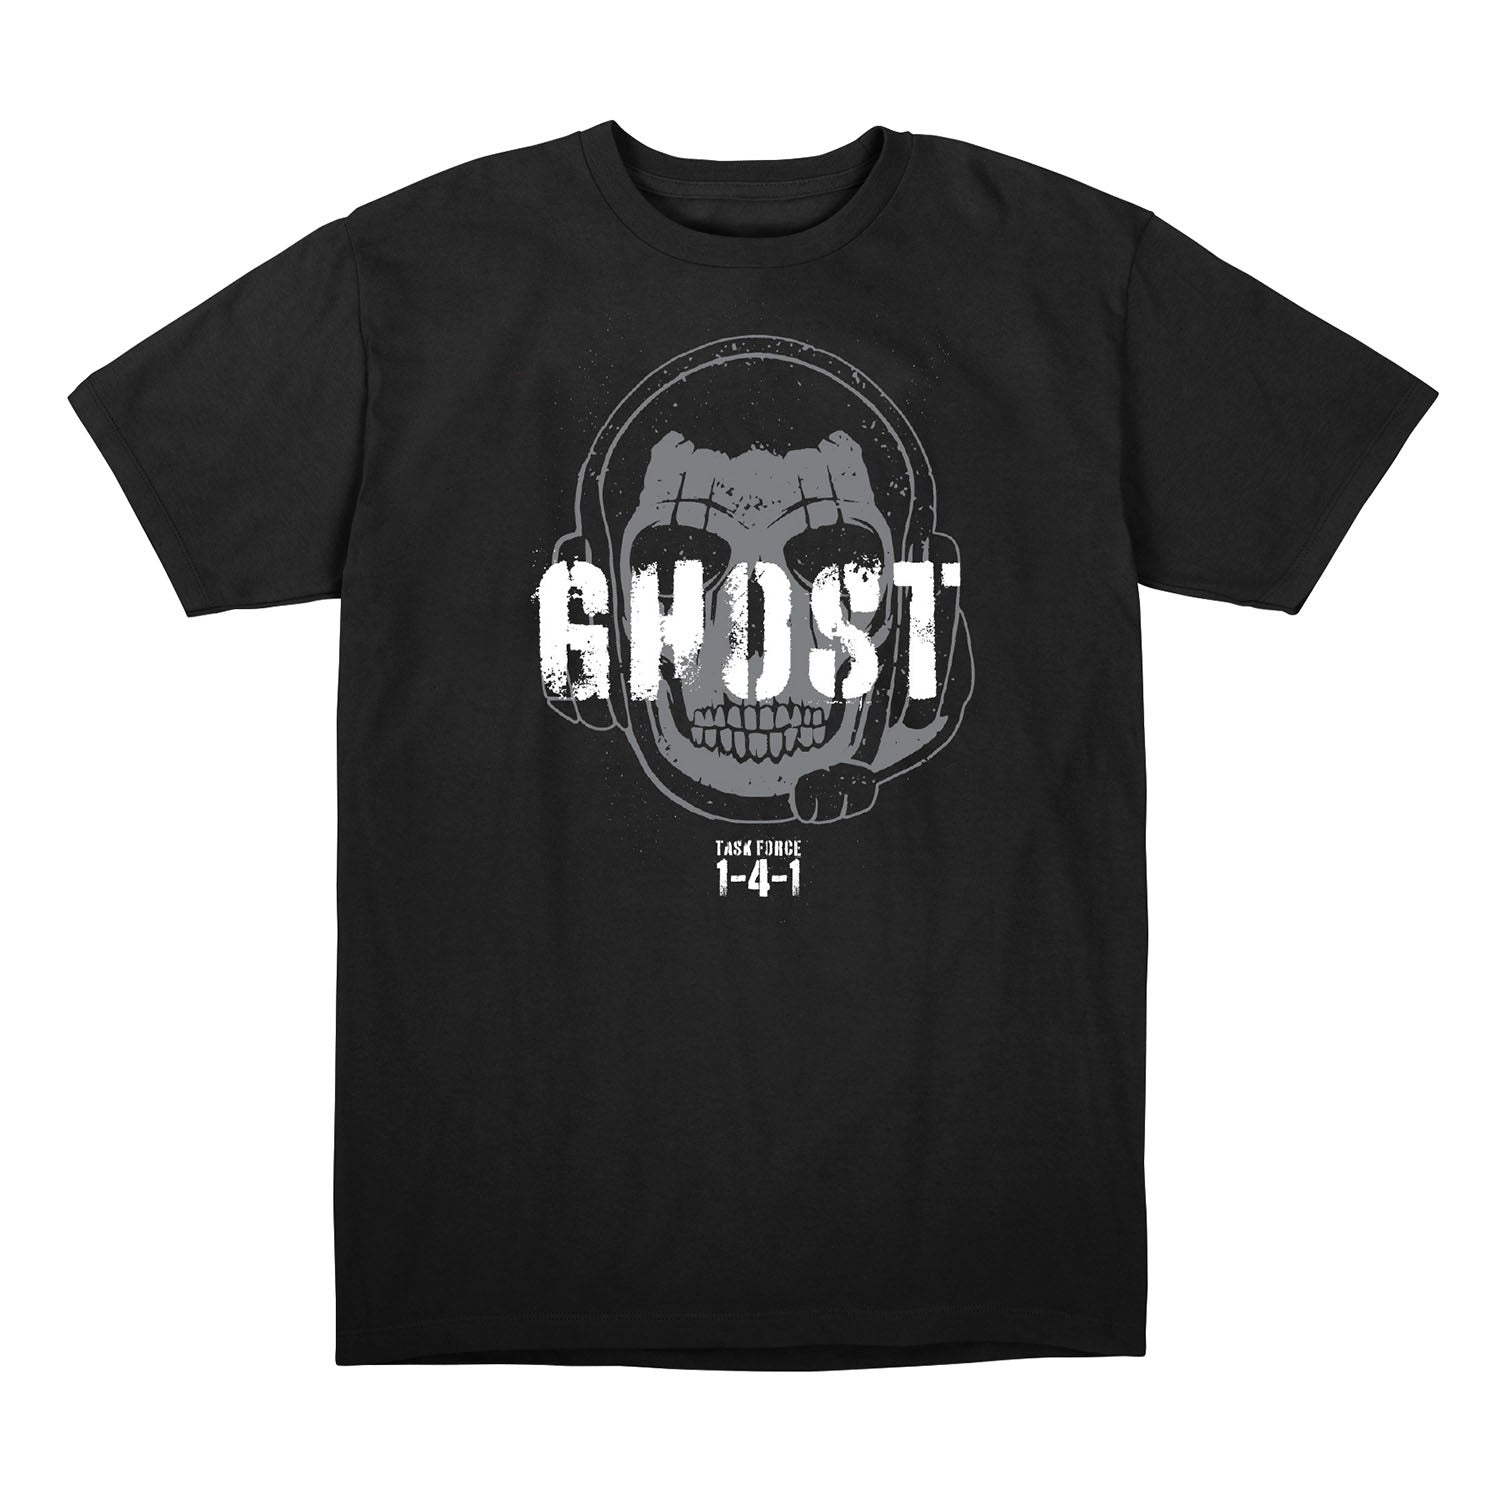 Call of Duty Black Ghost Silhouette T-Shirt - Front View